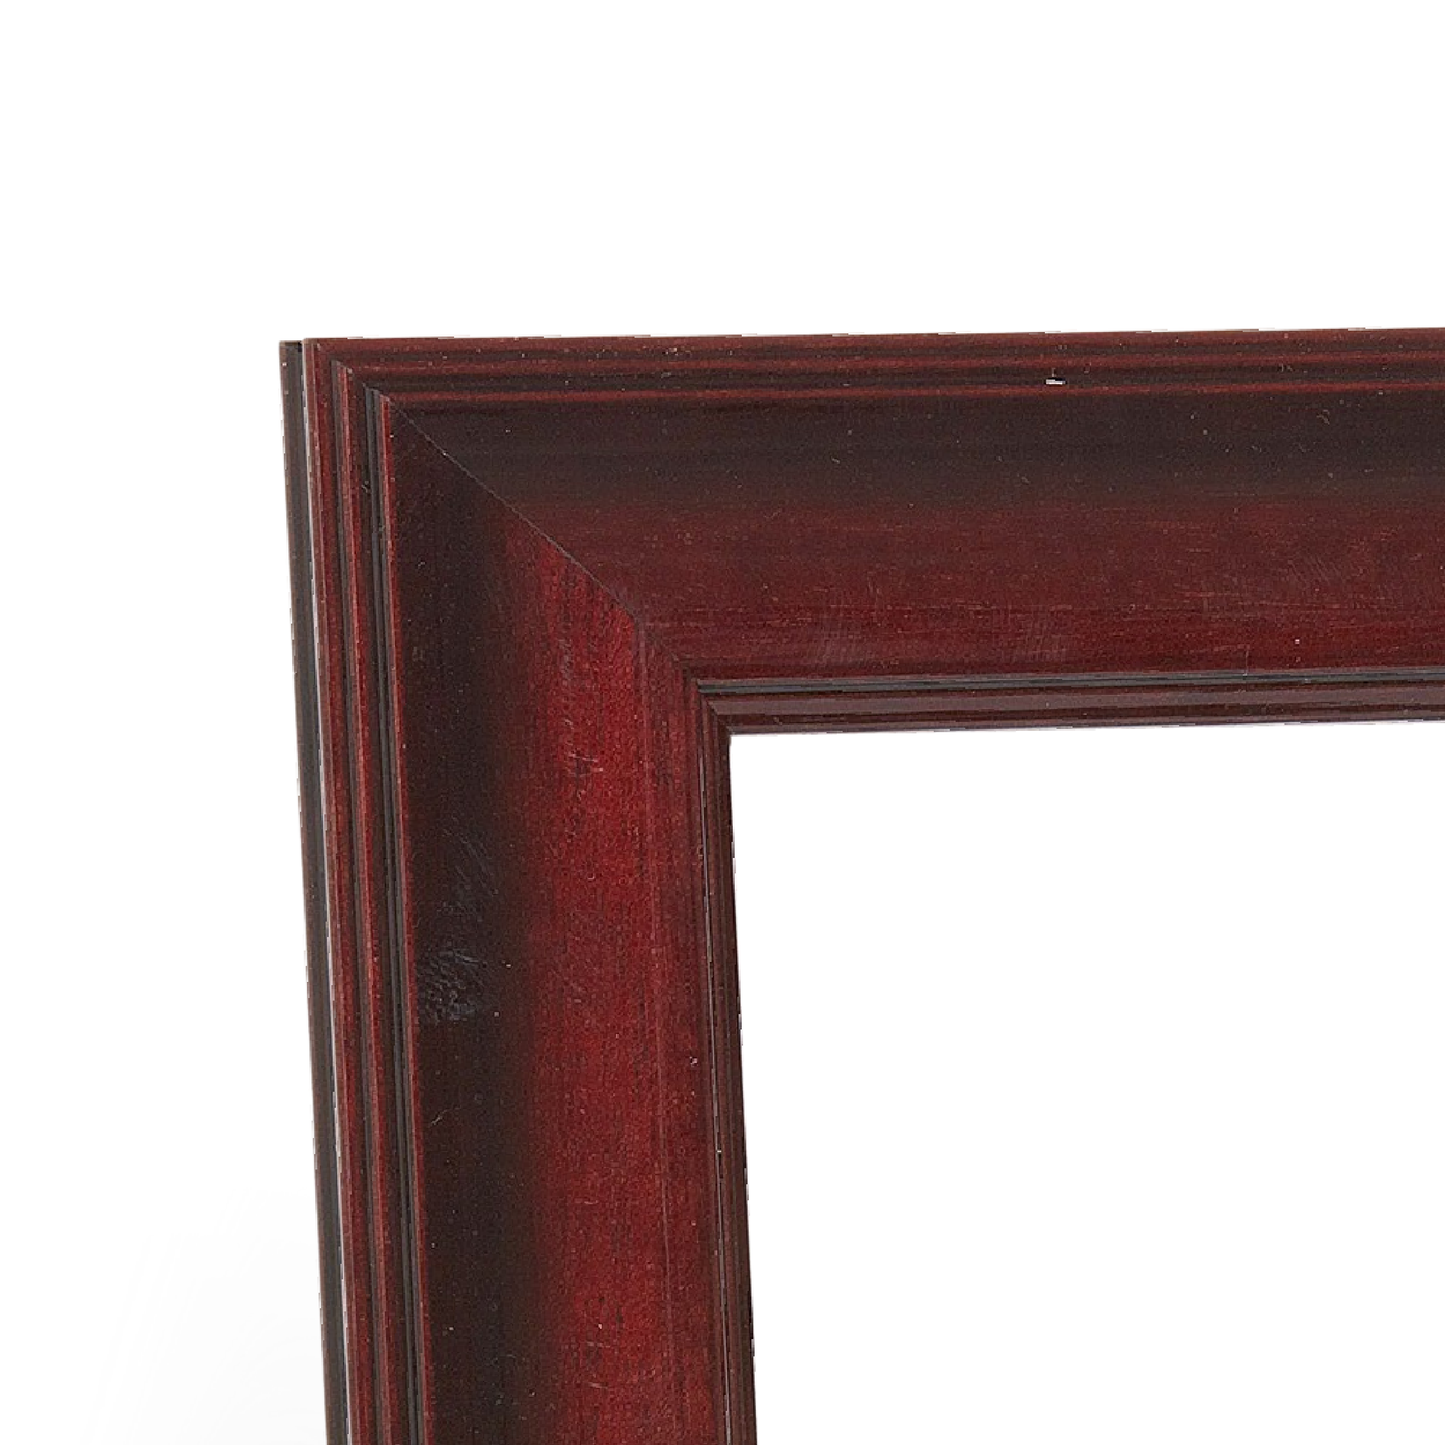 Mahogany Lacquer & Gold Trim Medium Width Table Top Frame